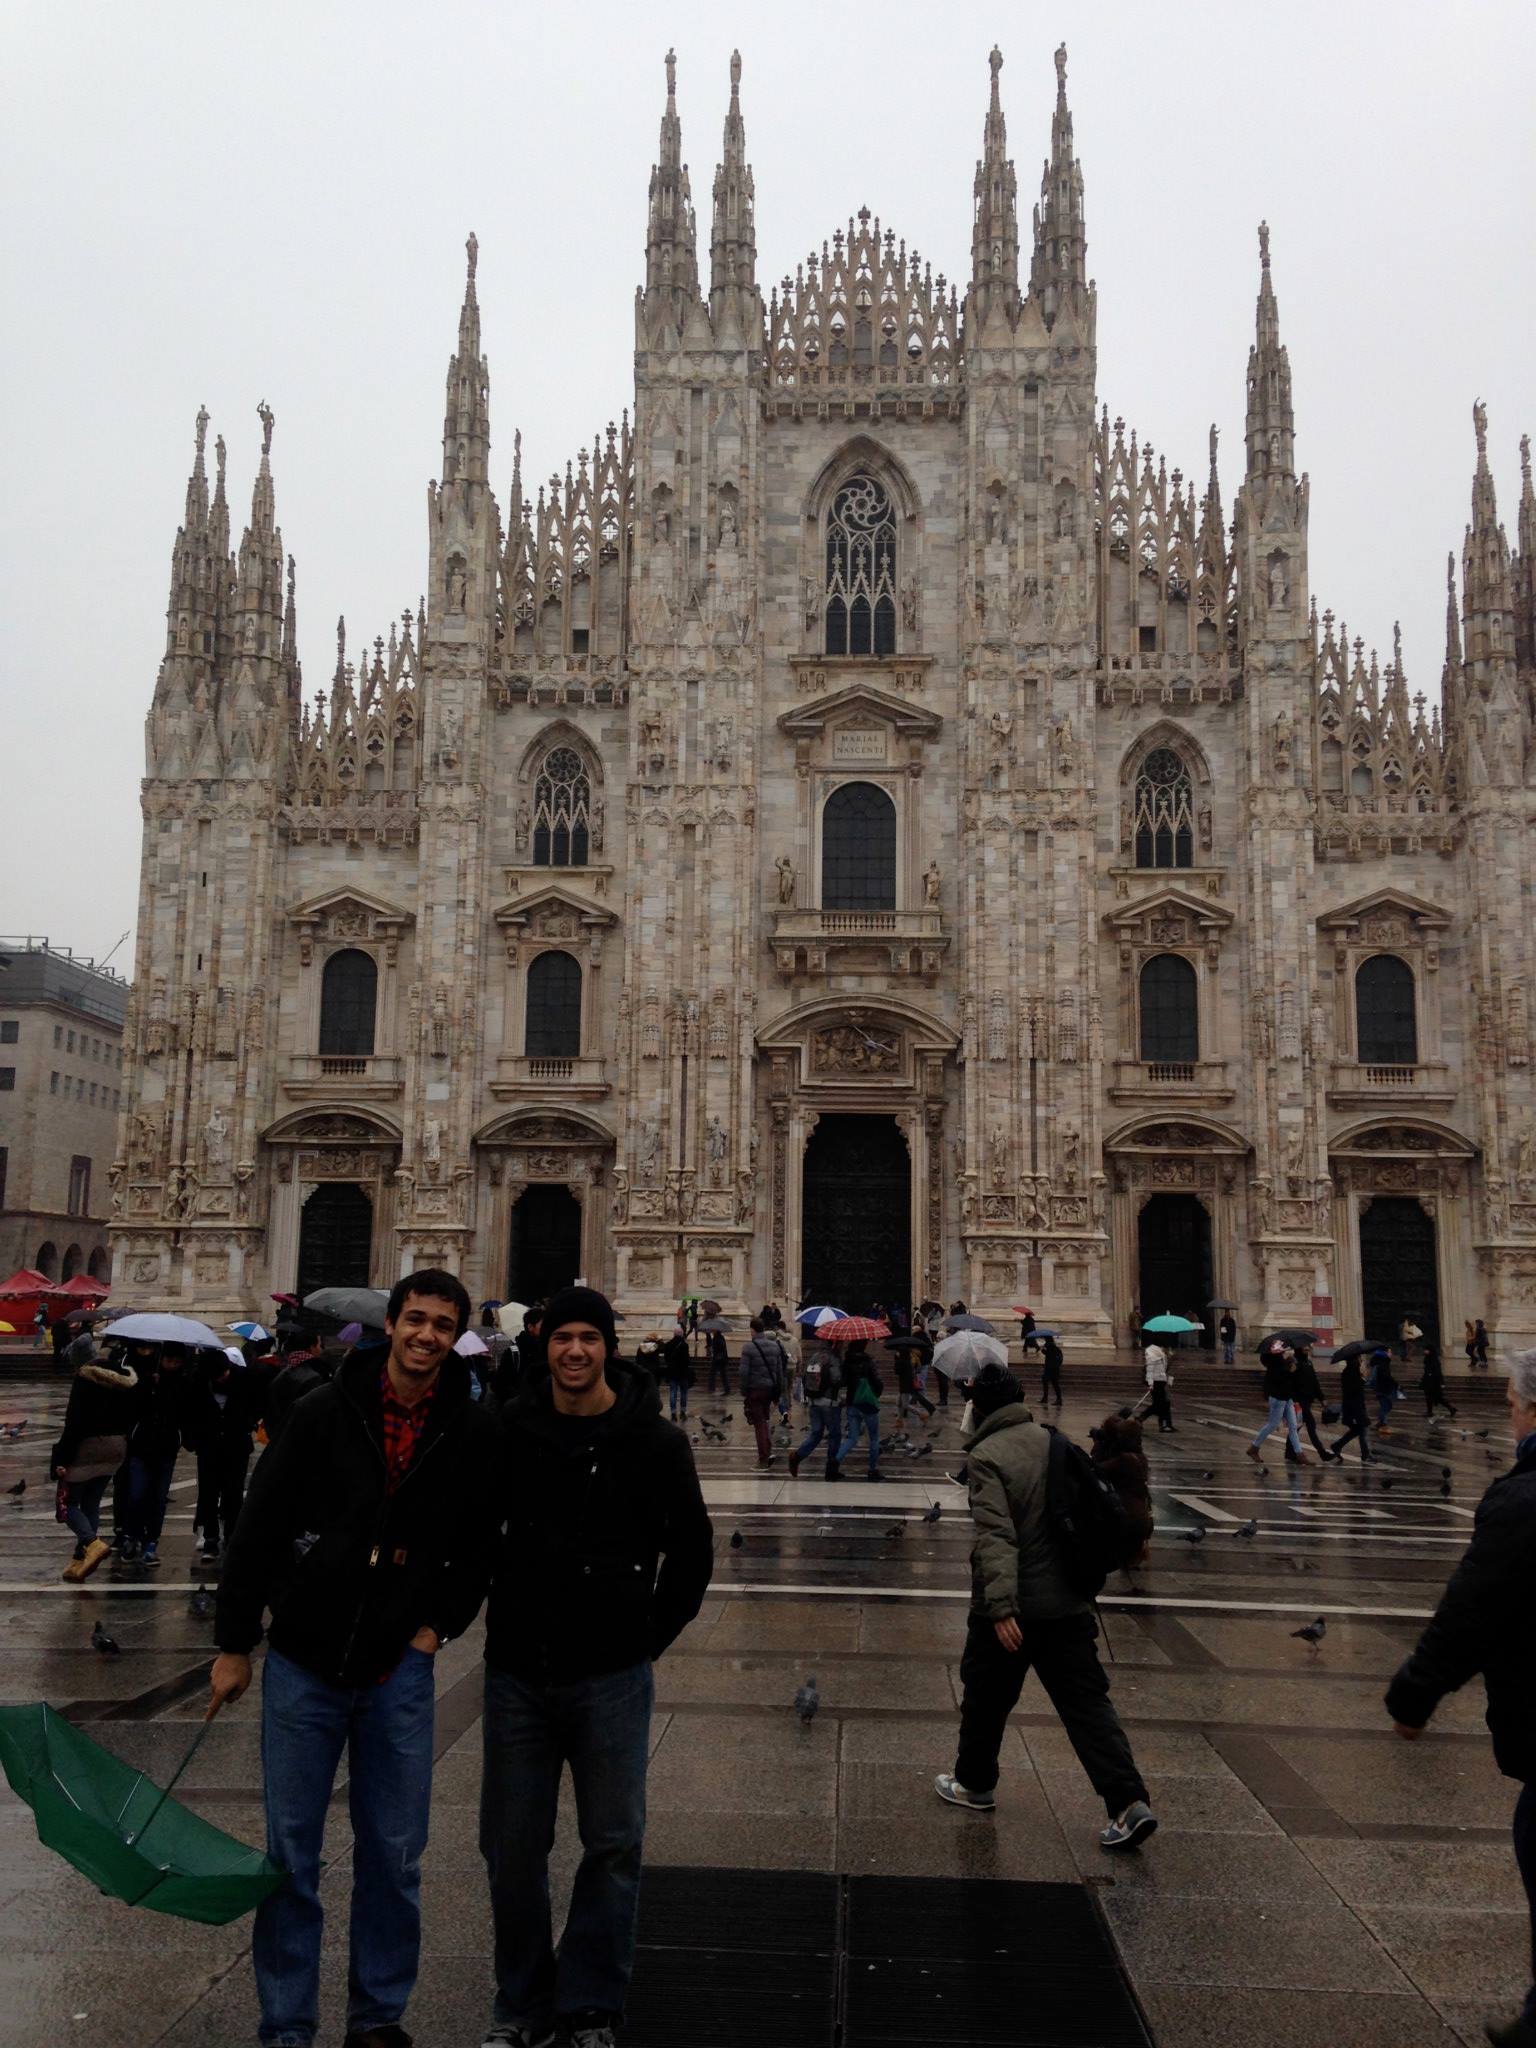 Jake and Zach teeny in front of Duomo, Milan's largest cathedral